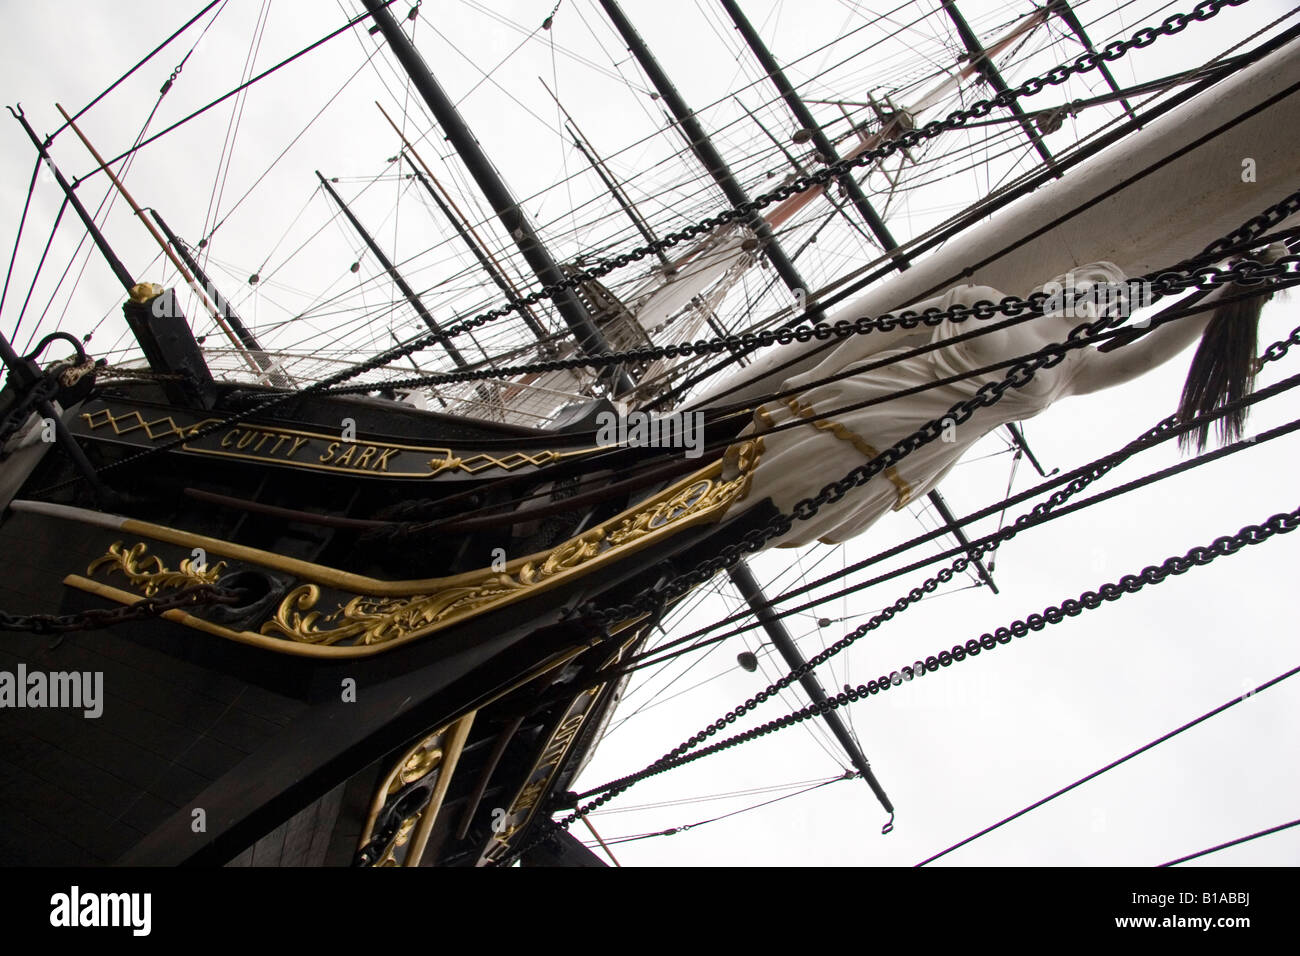 A detail from the Cutty Sark in Greenwich, London. Stock Photo